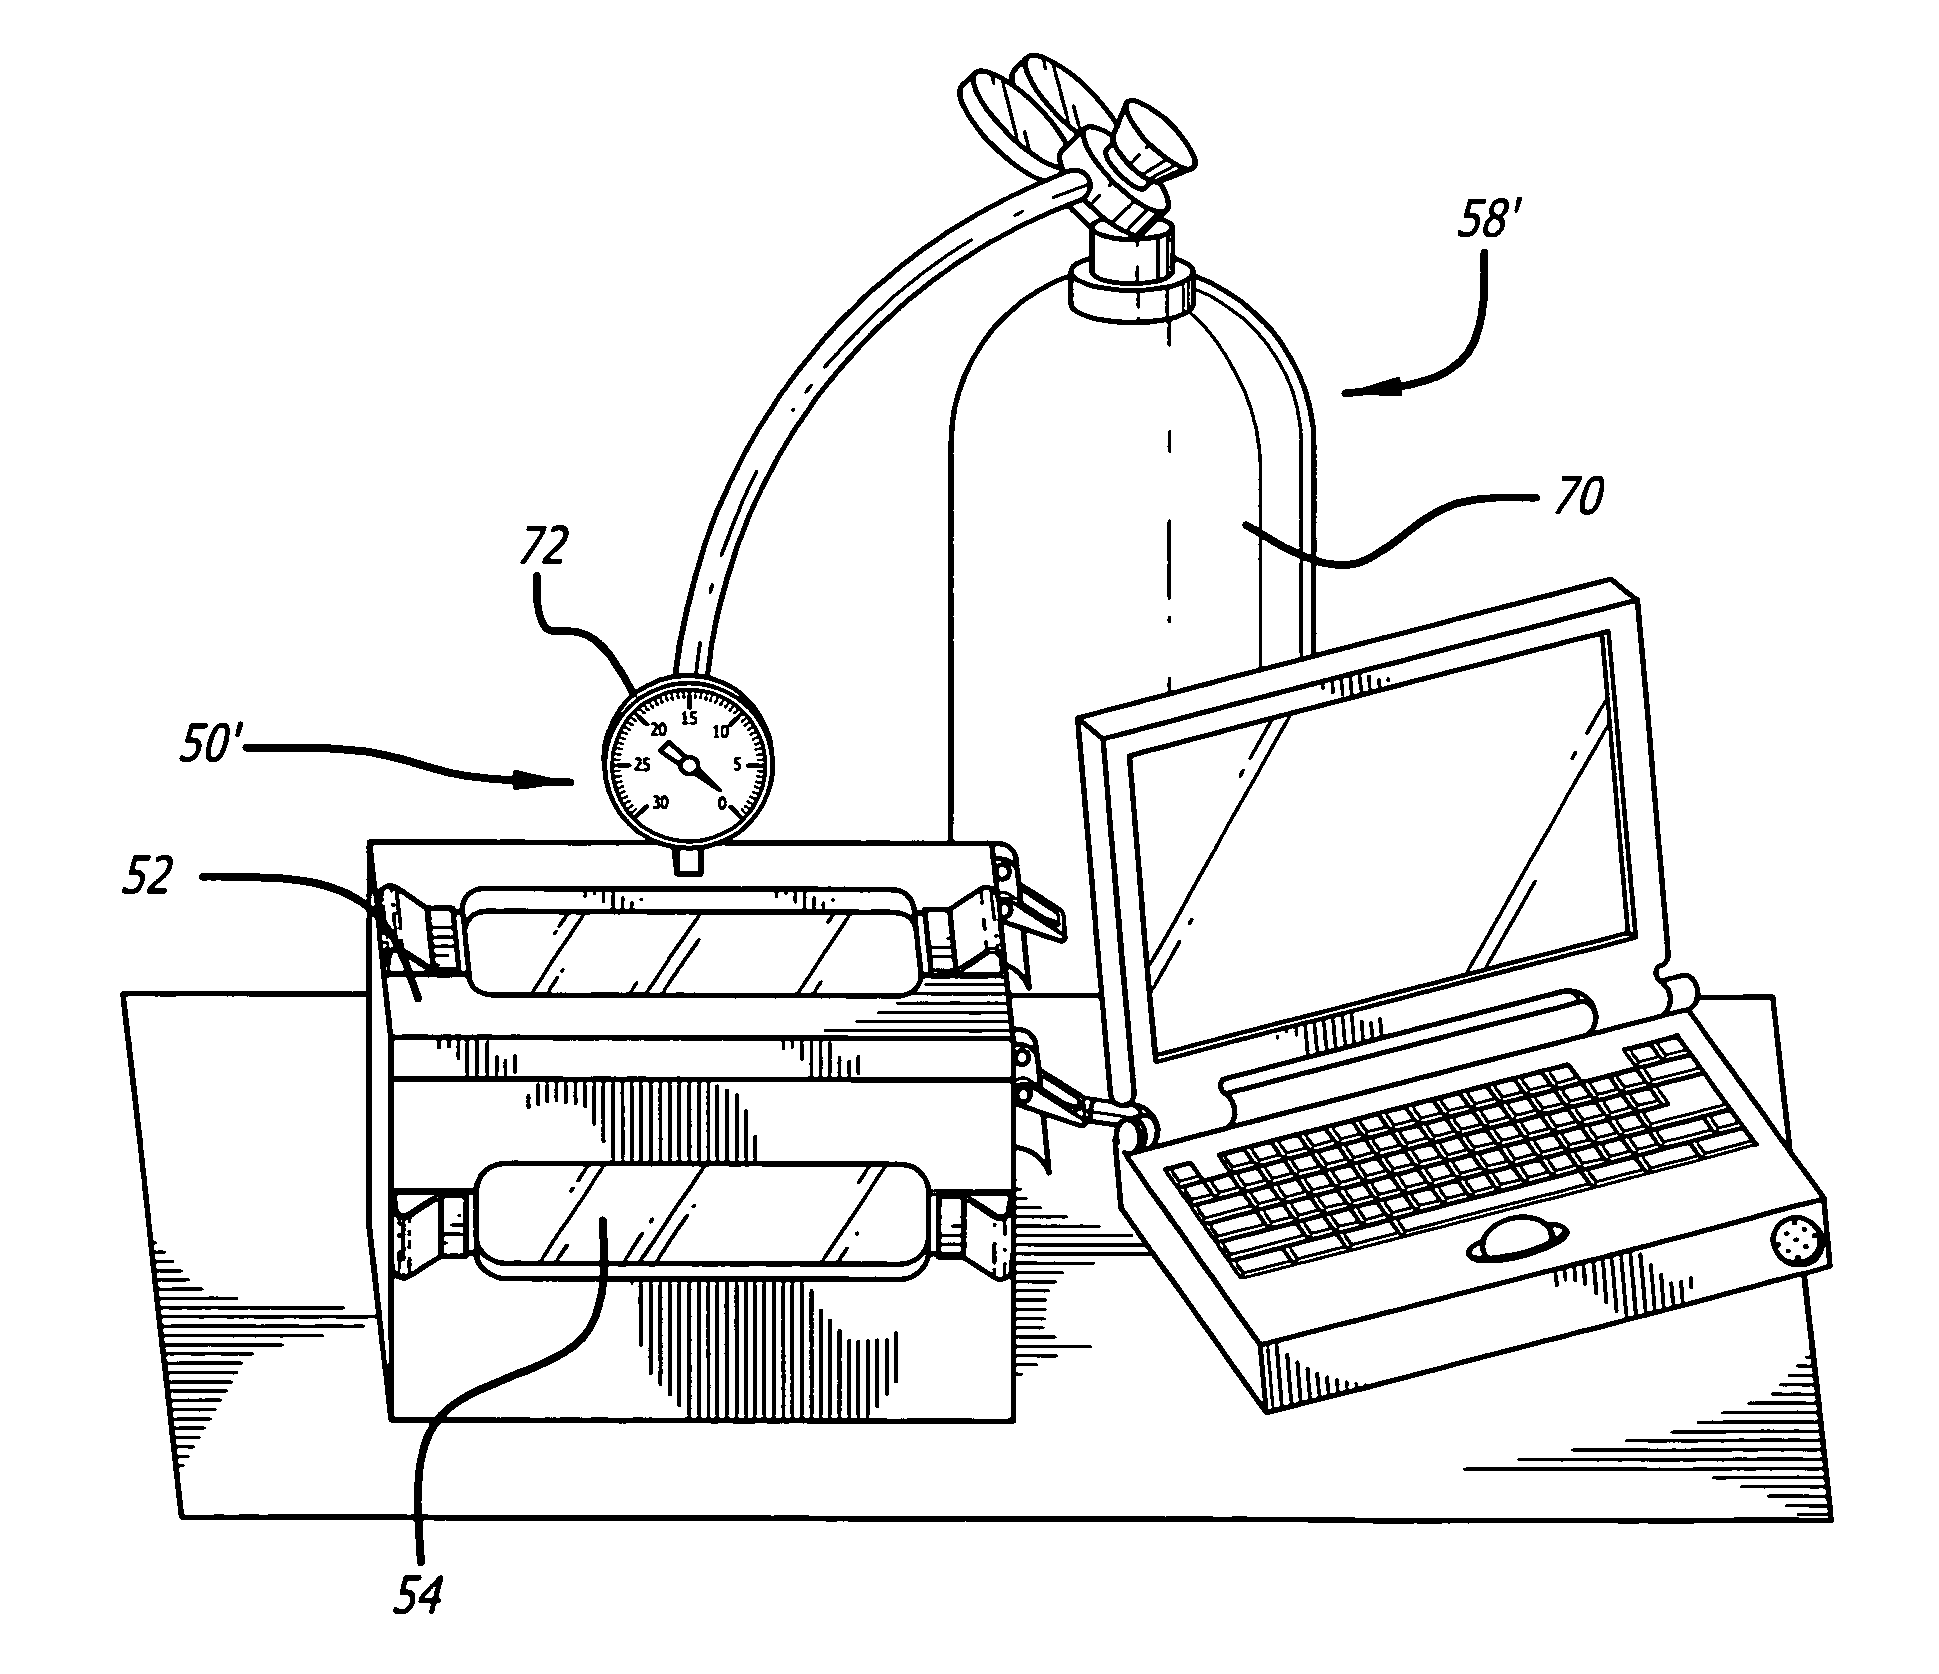 Servo track writing for ultra-high TPI disk drive in low density medium condition